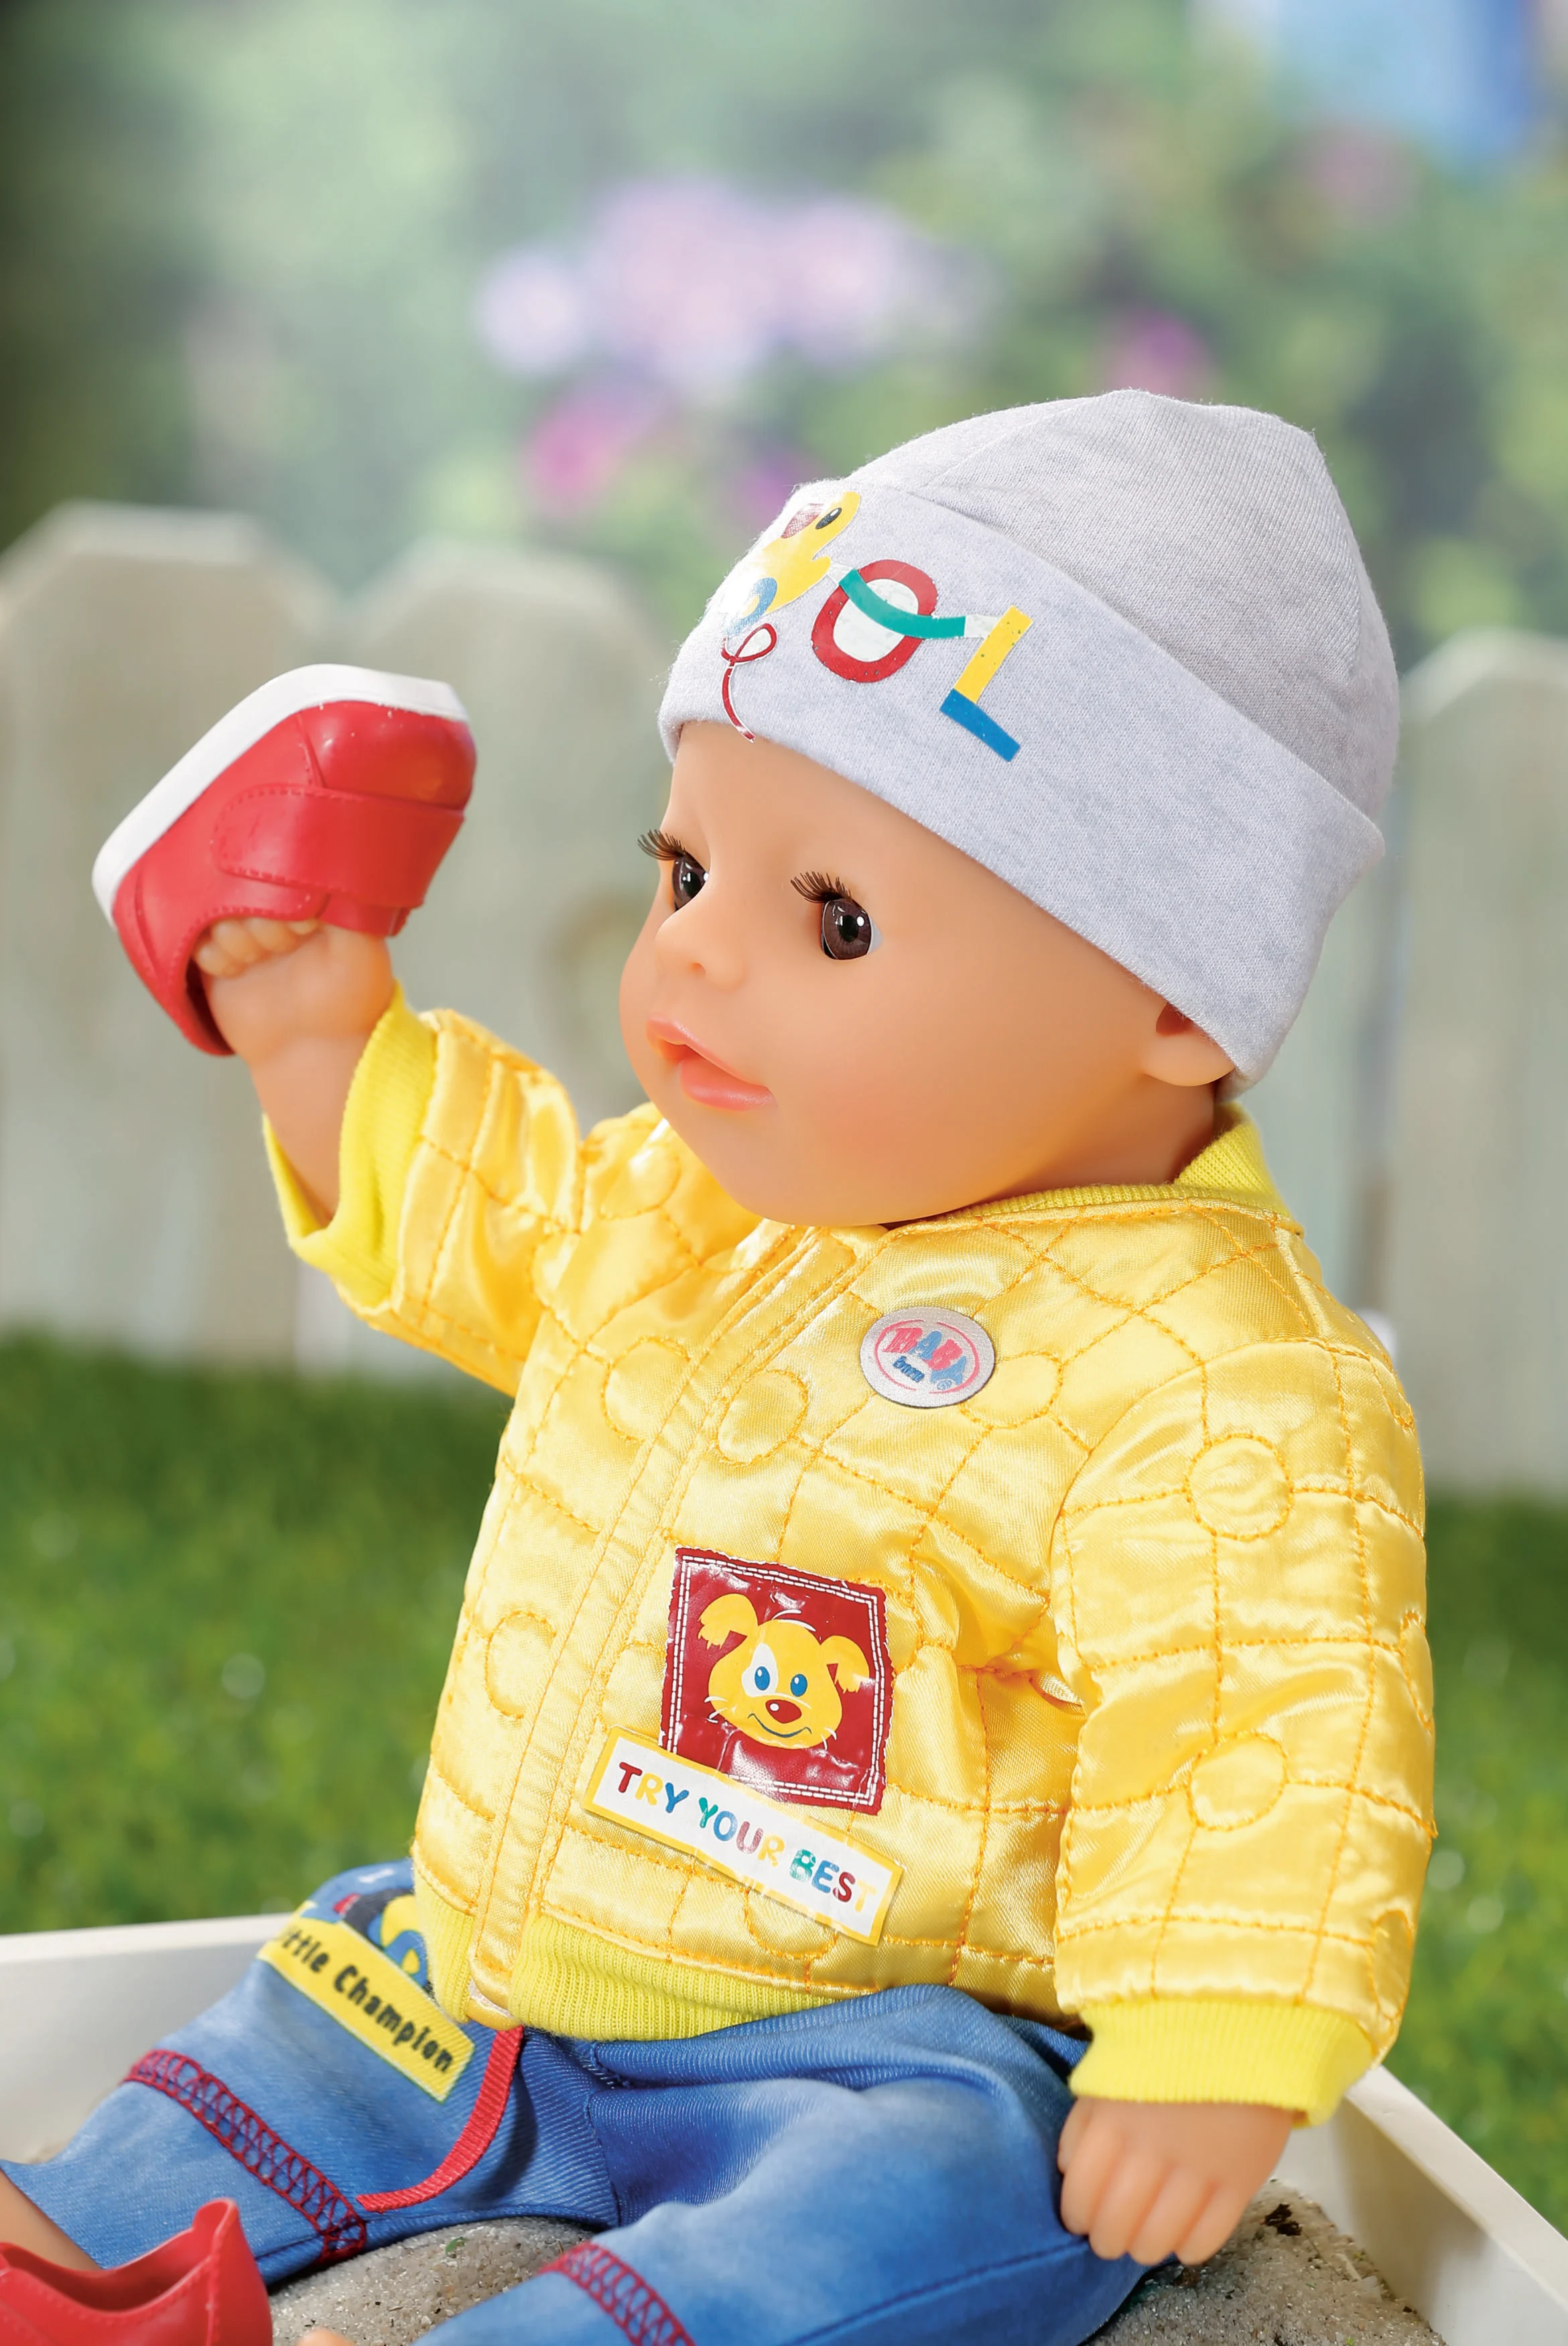 BABY born - Little Cool Kids Outfit 36cm